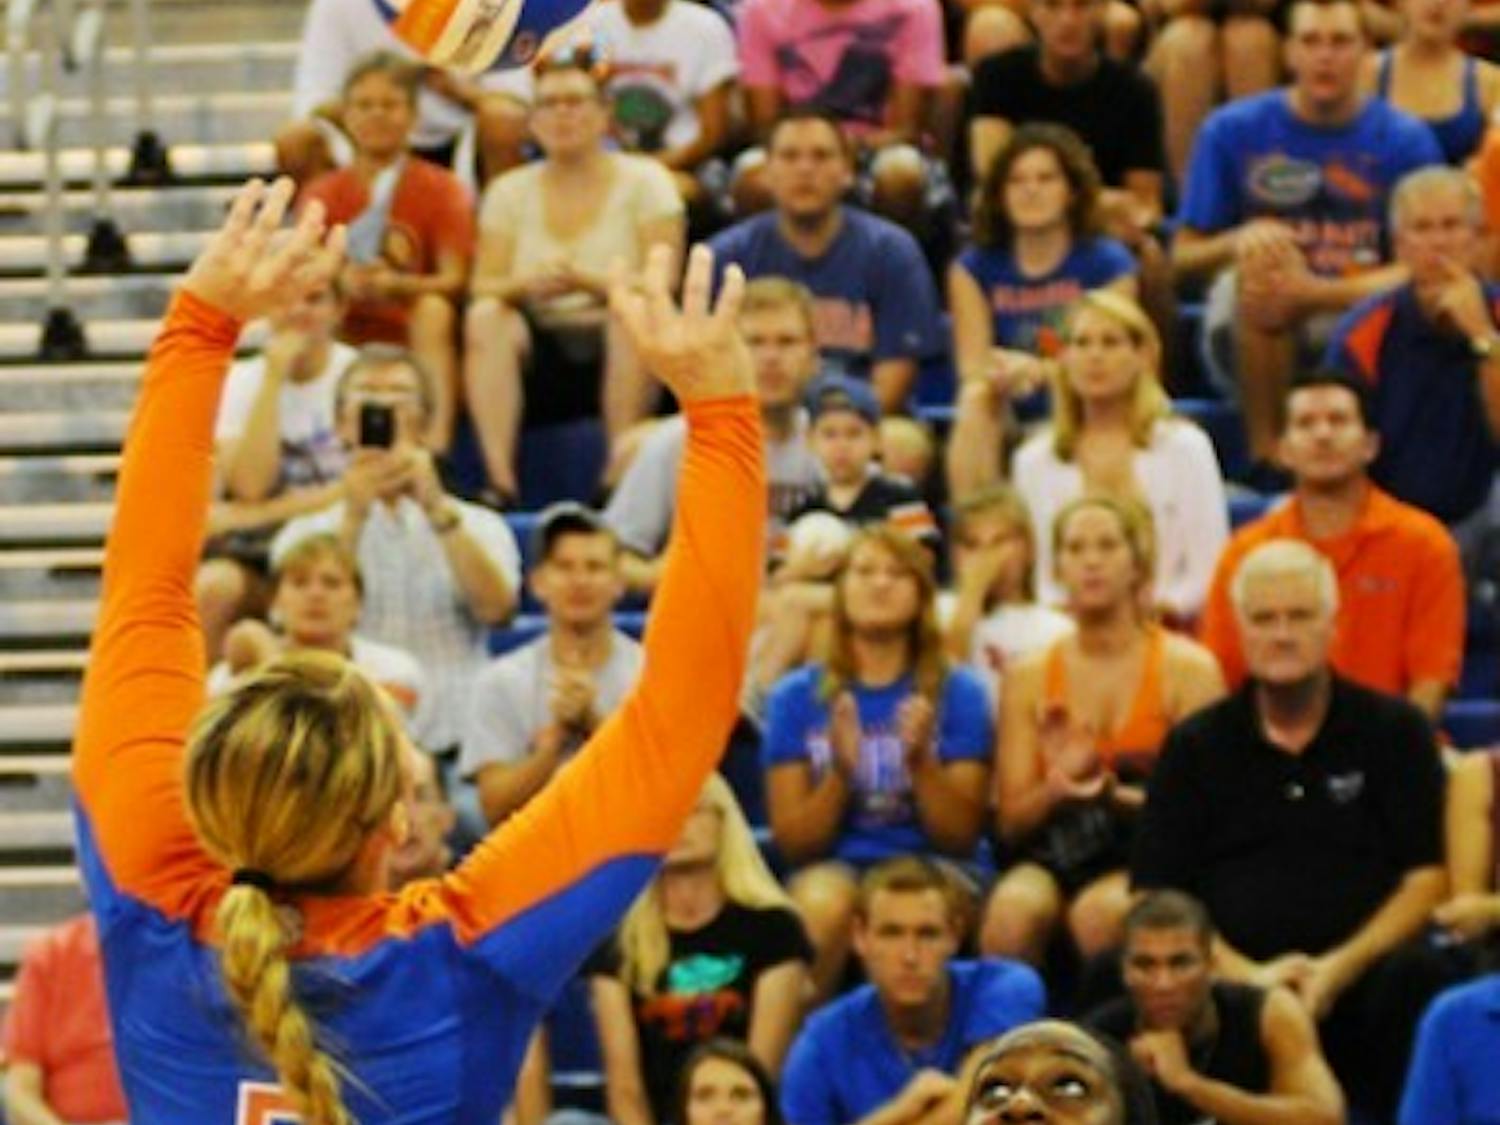 Sophomore middle blocker Chloe Mann had 10 kilss, 4.5 blocks and seven digs in a loss to No. 19 Kentucky on Sunday.